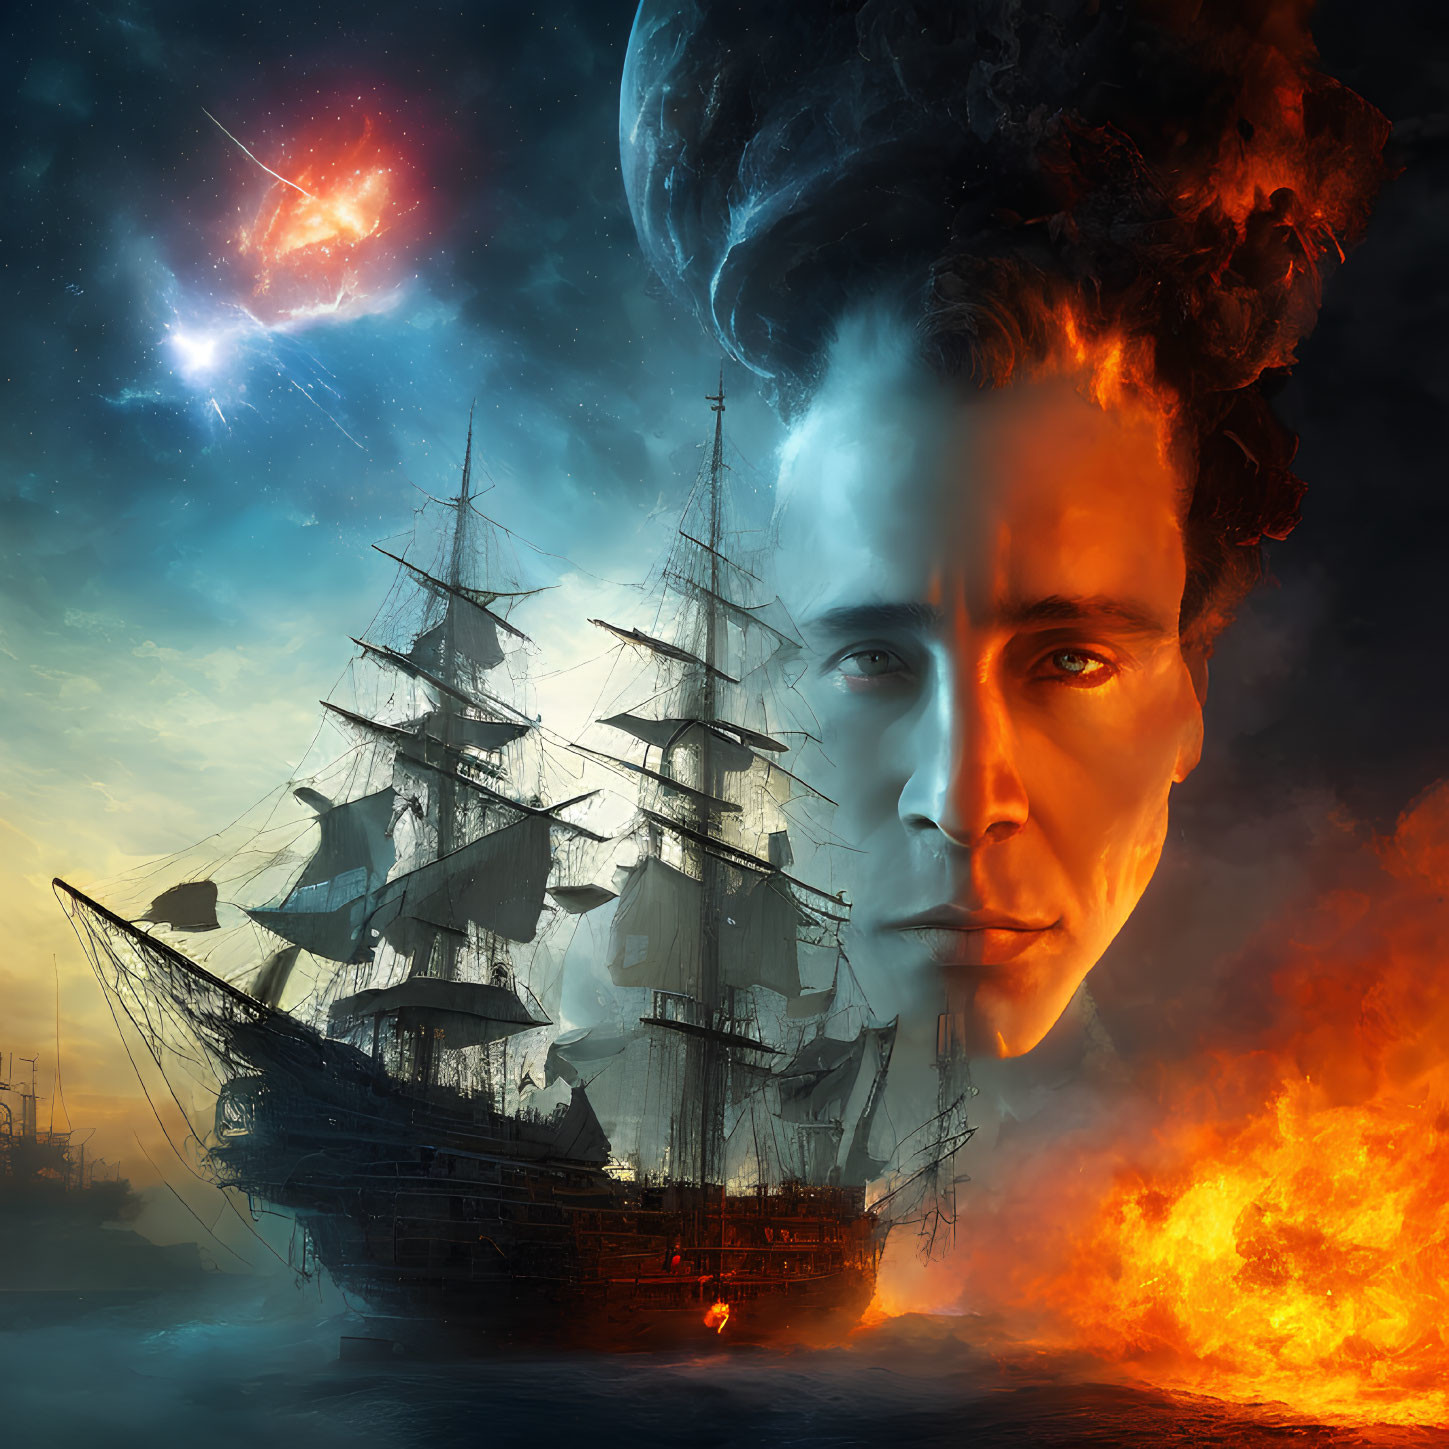 Composite image of fiery sea, sail ship, man's face, and cosmic backdrop.